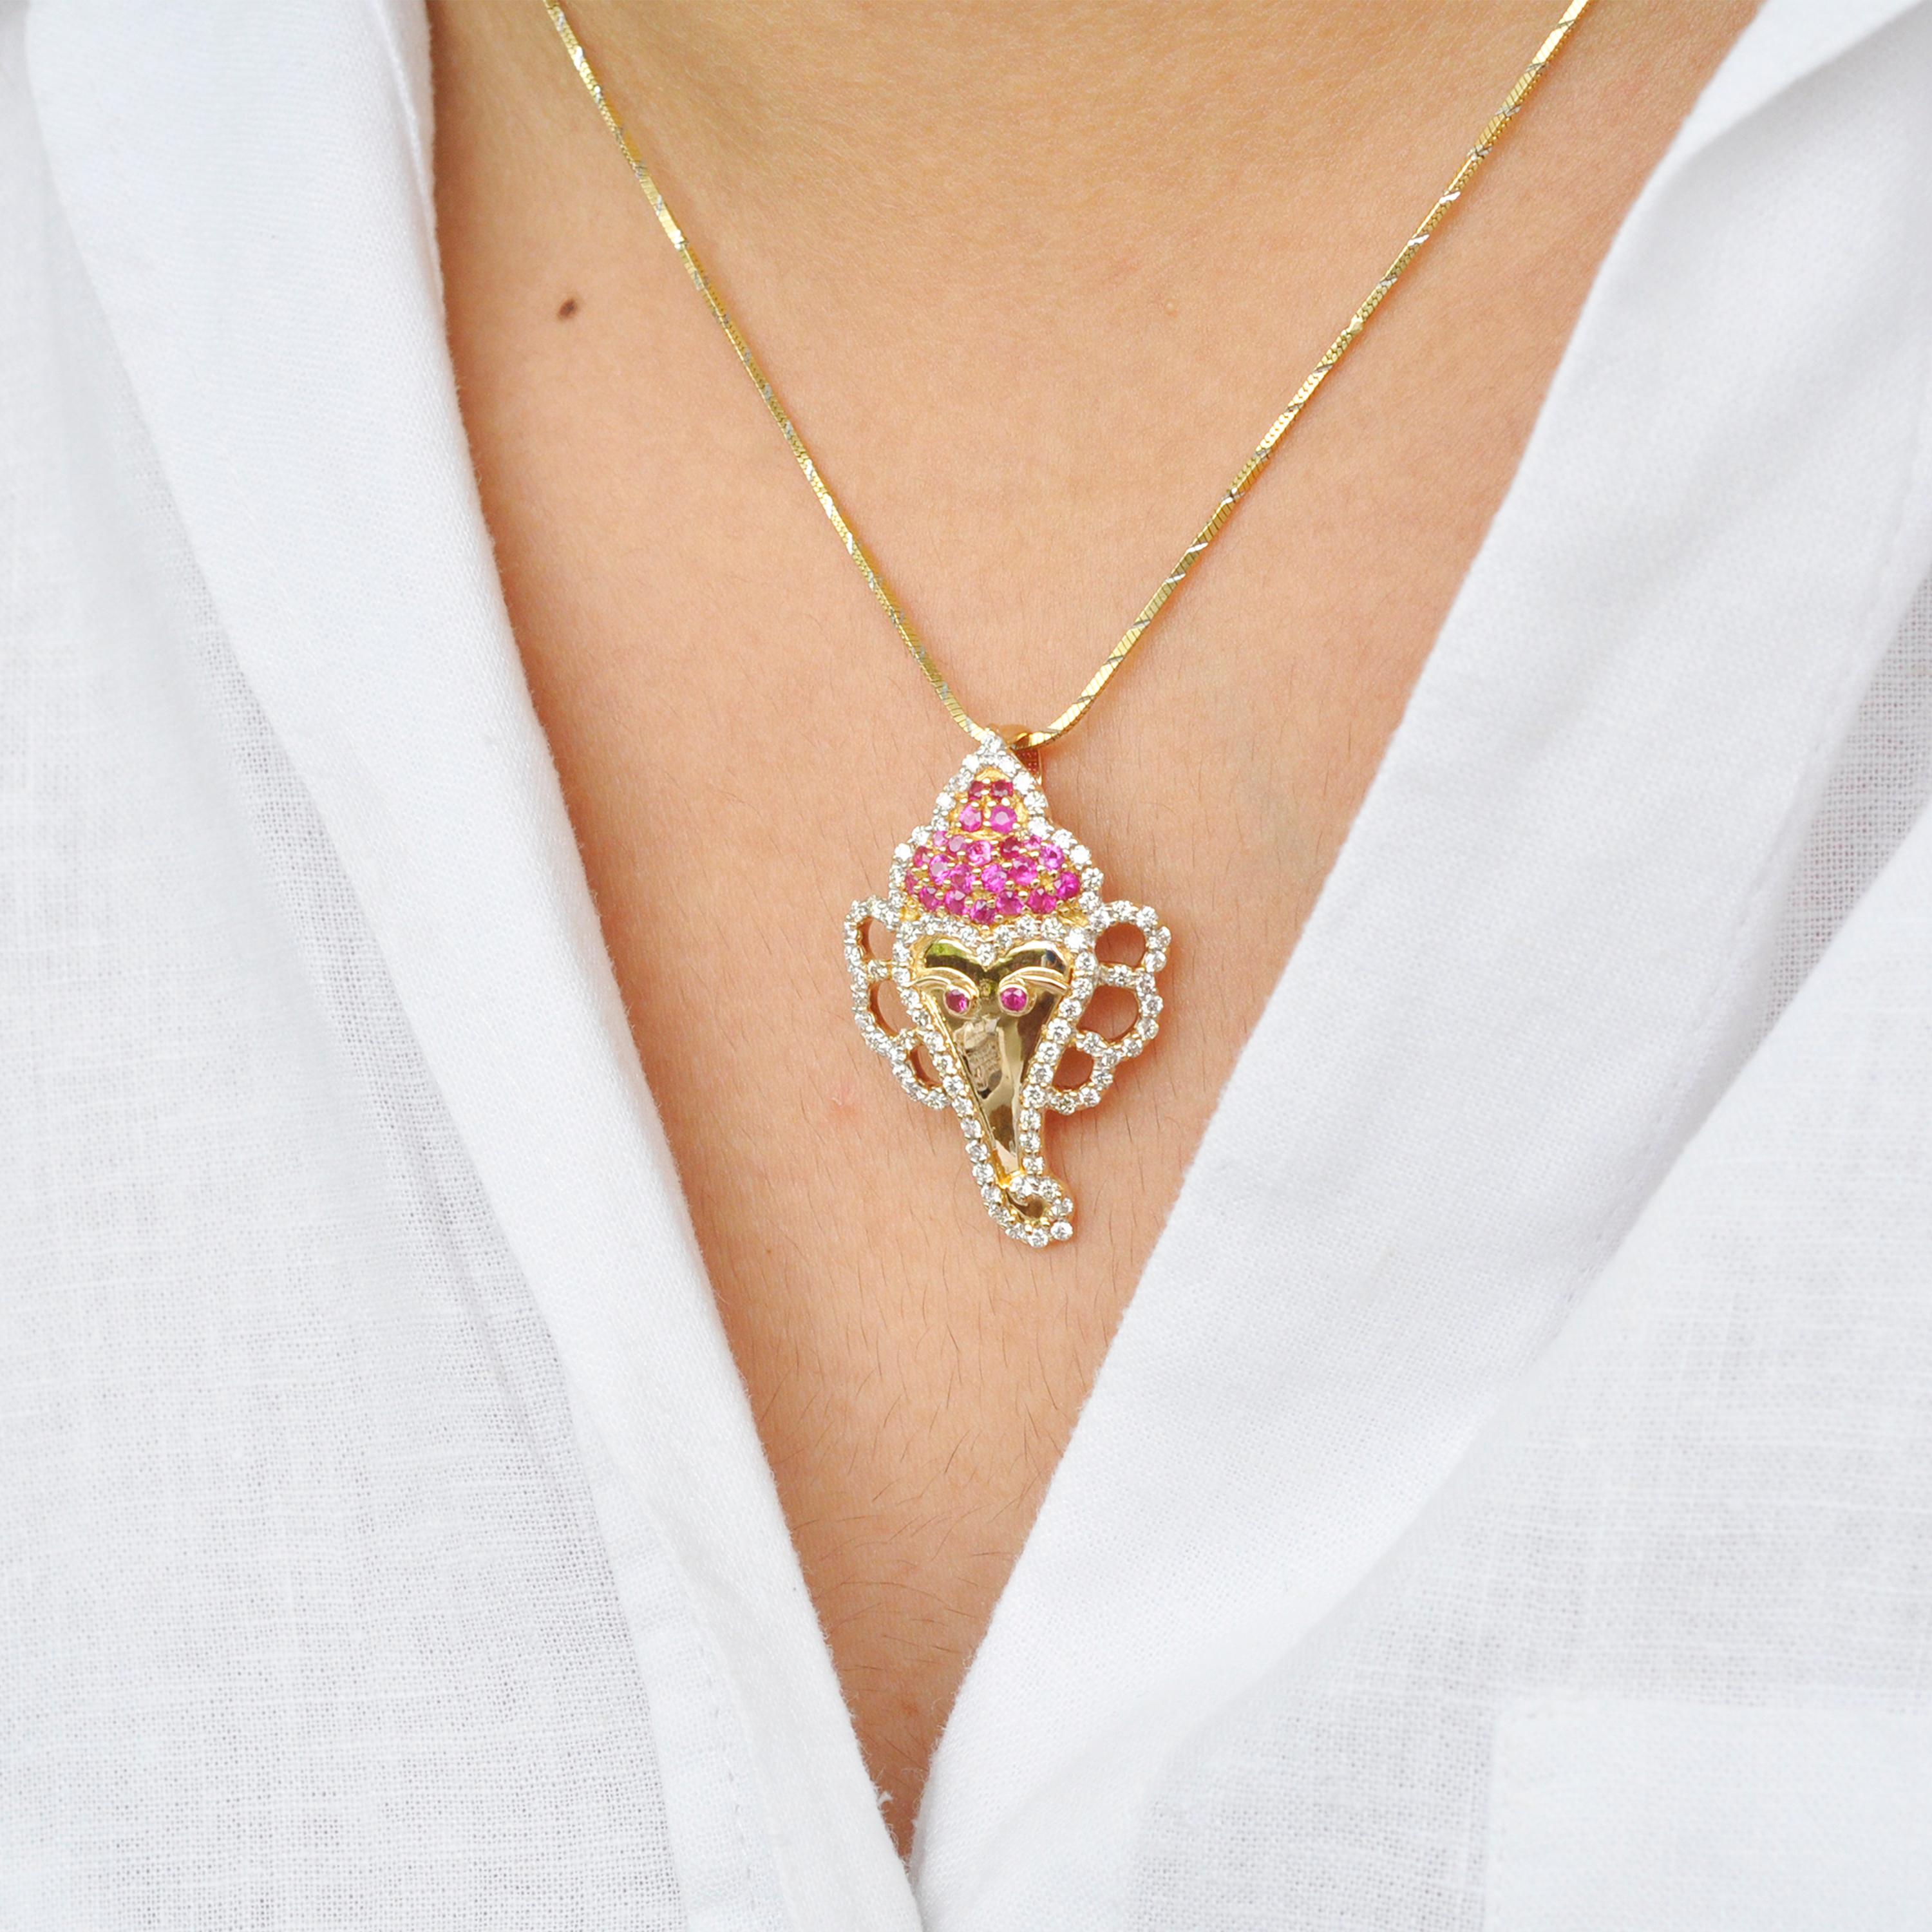 18 karat gold ganesha round ruby diamond pendant necklace.

This pendant is inspired by Lord Ganesha who is the harbinger of good luck and good fortune in India. Lord Ganesha had a face of an elephant, thus so, set in 18 Karat gold. Lustrous round